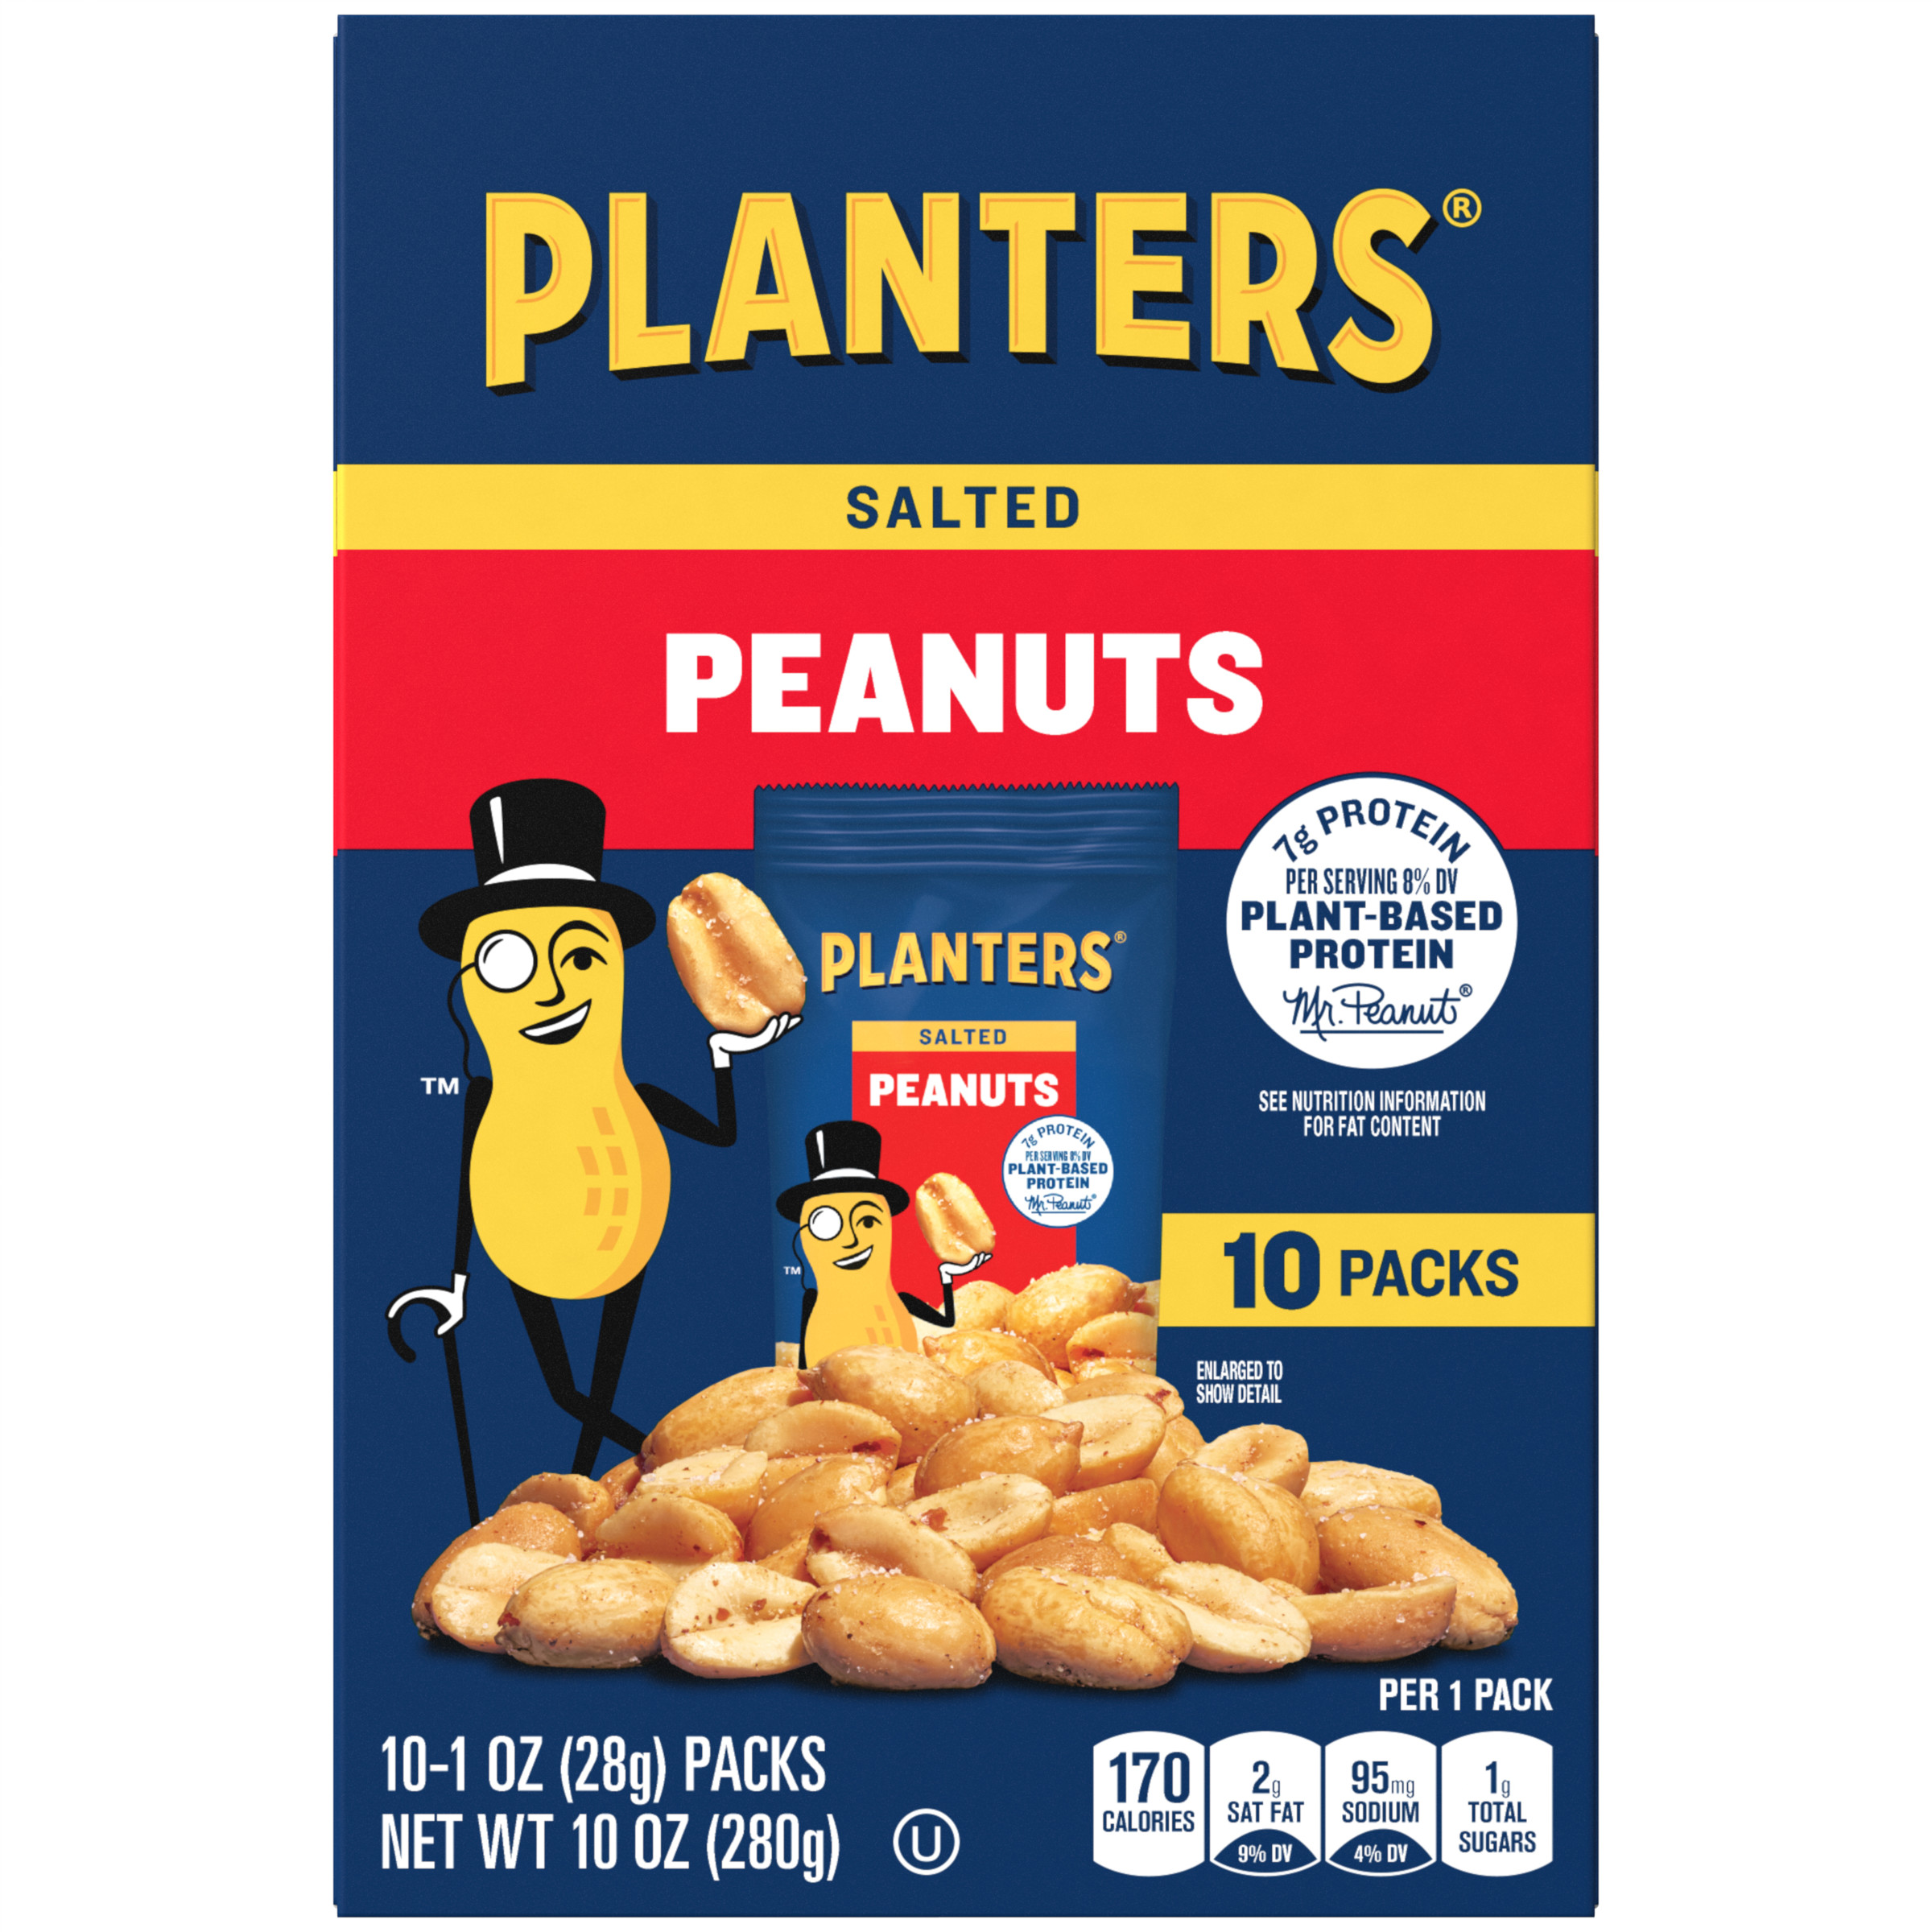 PLANTERS Salted Peanuts, Party Snacks, Plant Based Protein, 10 Ct Box, 1 oz Packs - image 1 of 9